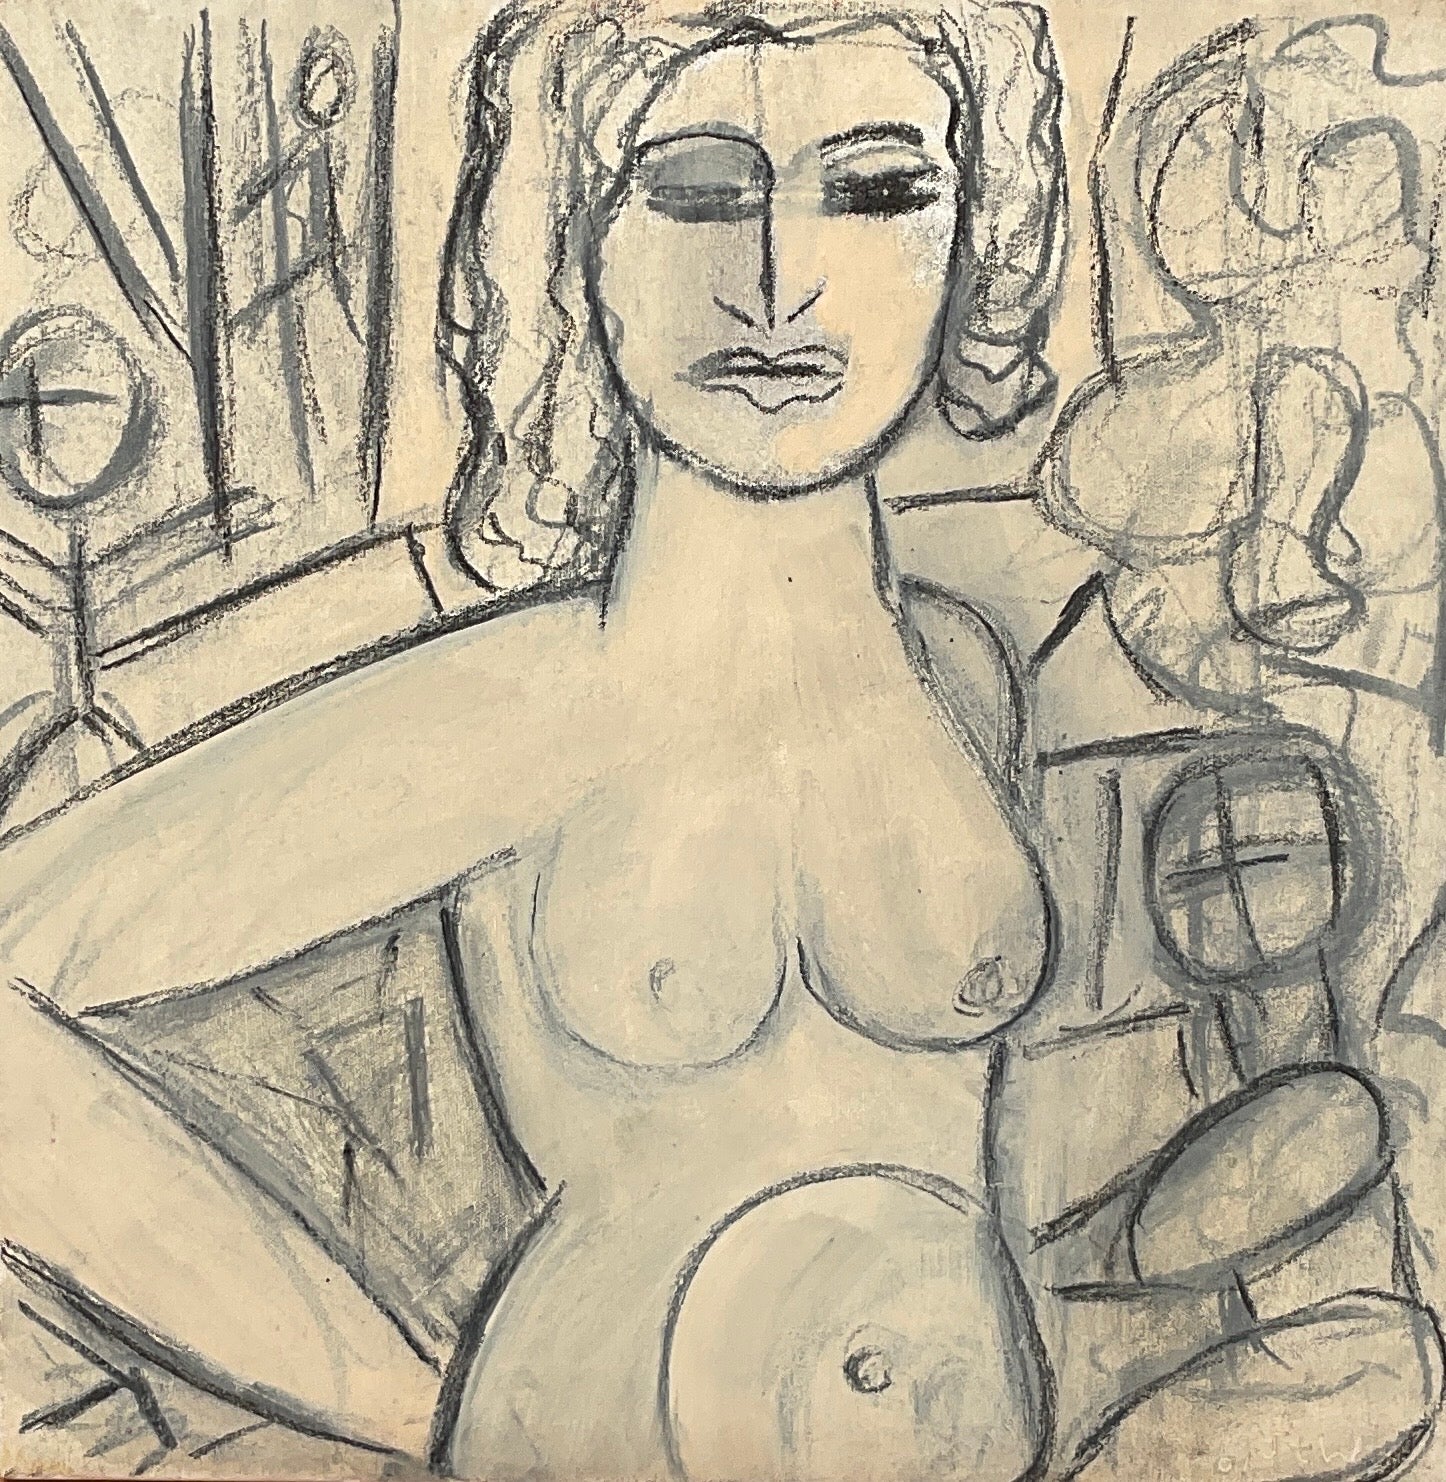 W untitled nude black and white sketch